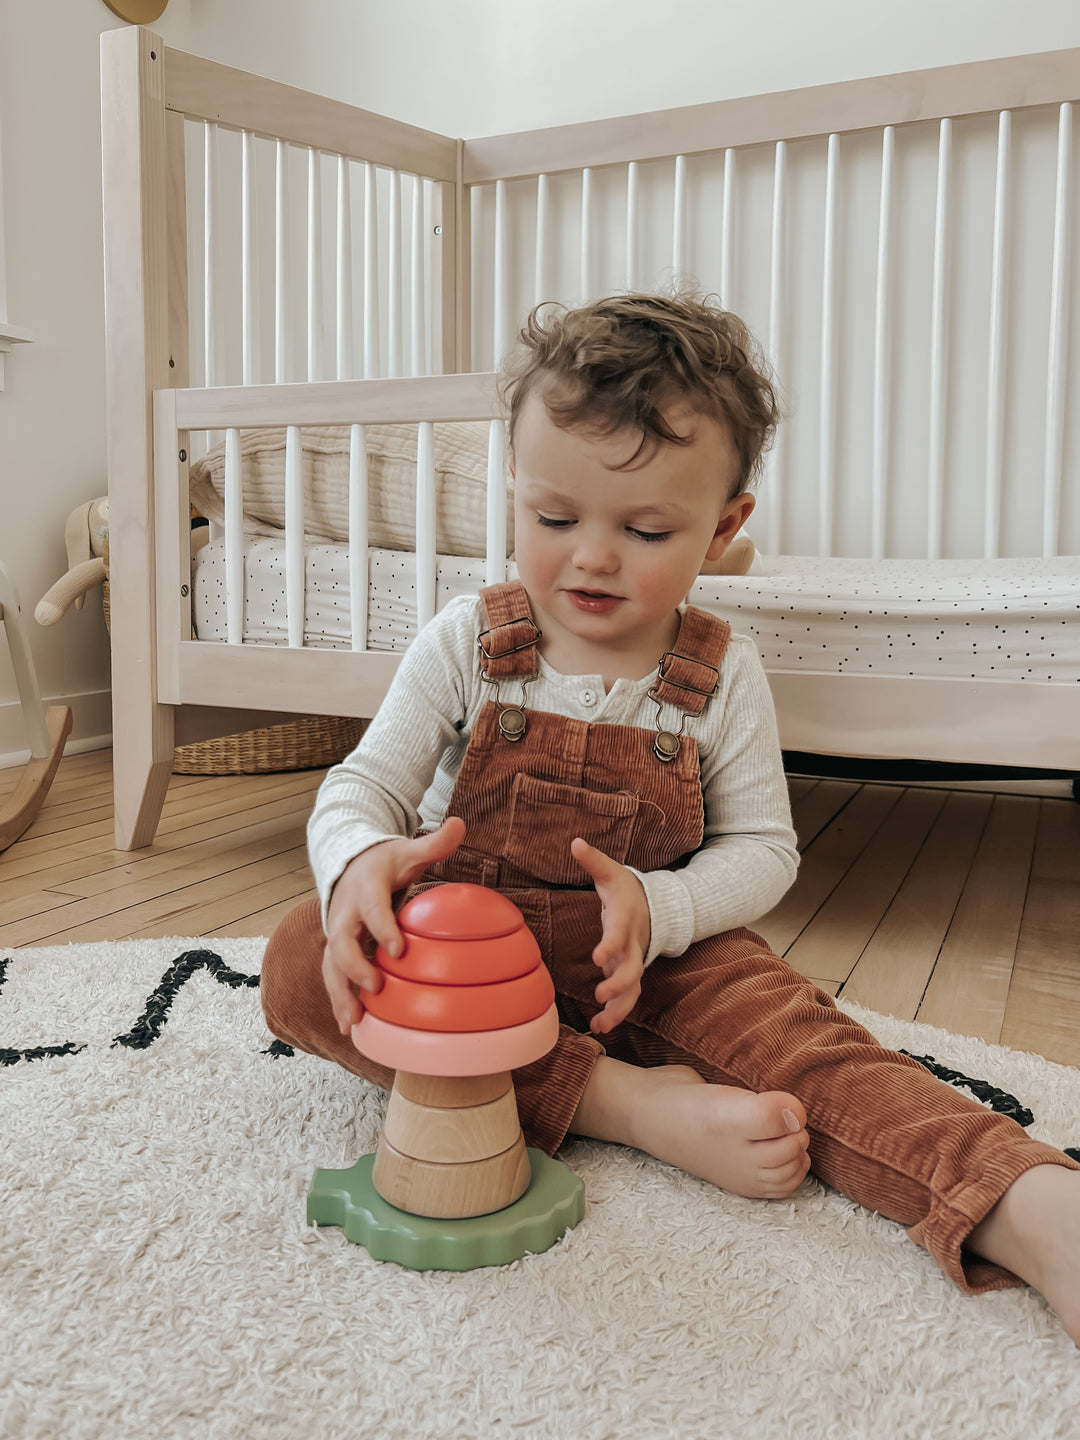 Toddler in overalls playing with a colorful stacking toy in a nursery.